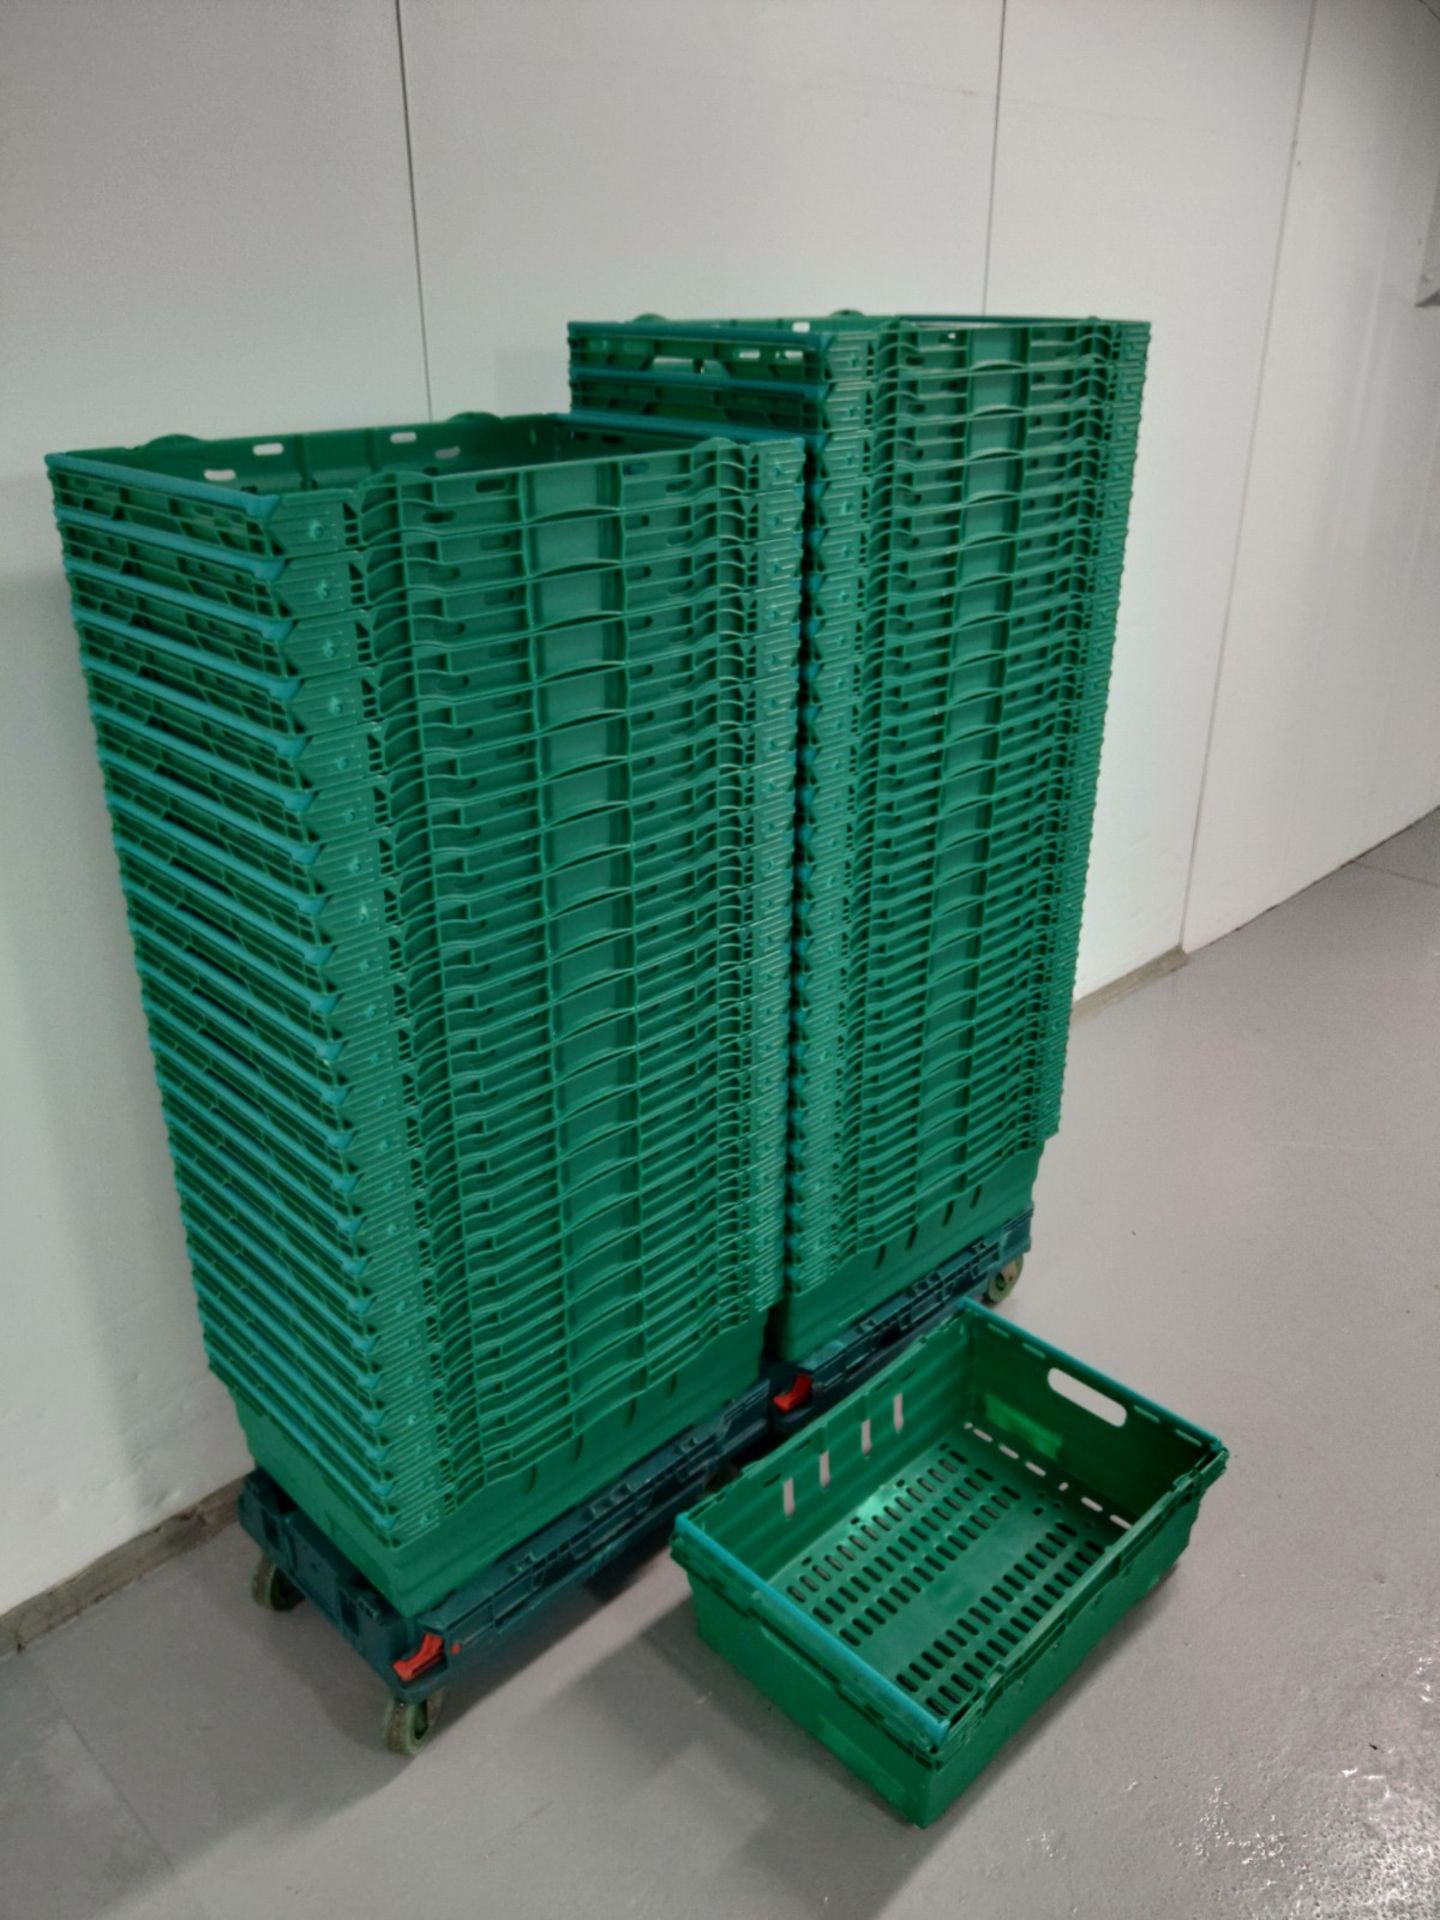 Tote Box Ventilated Supermarket Crate - Image 2 of 3